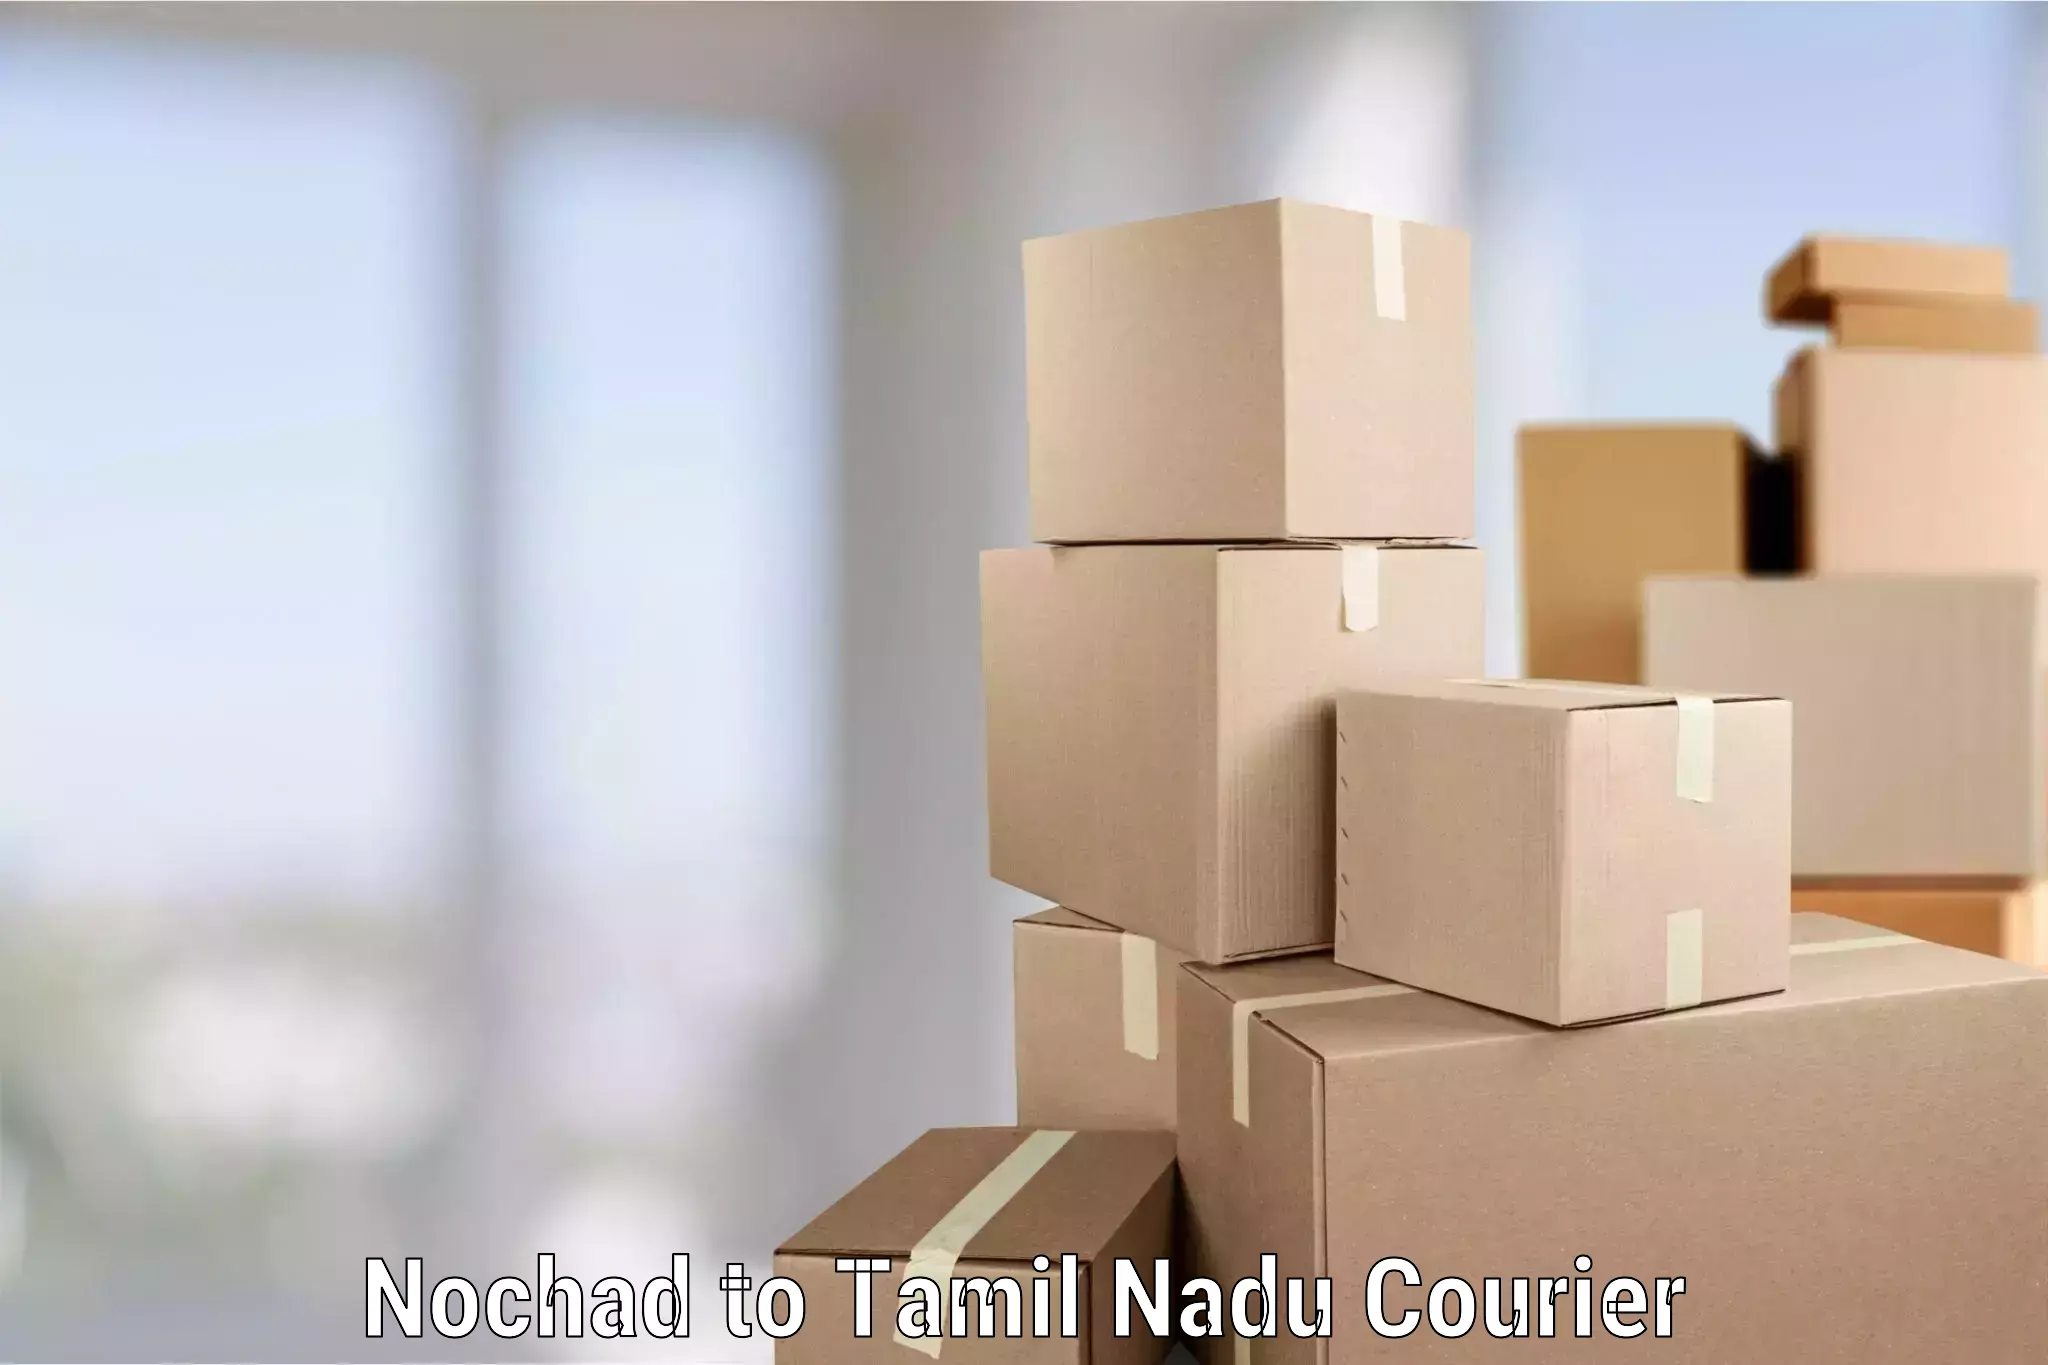 Reliable furniture movers Nochad to Korattur